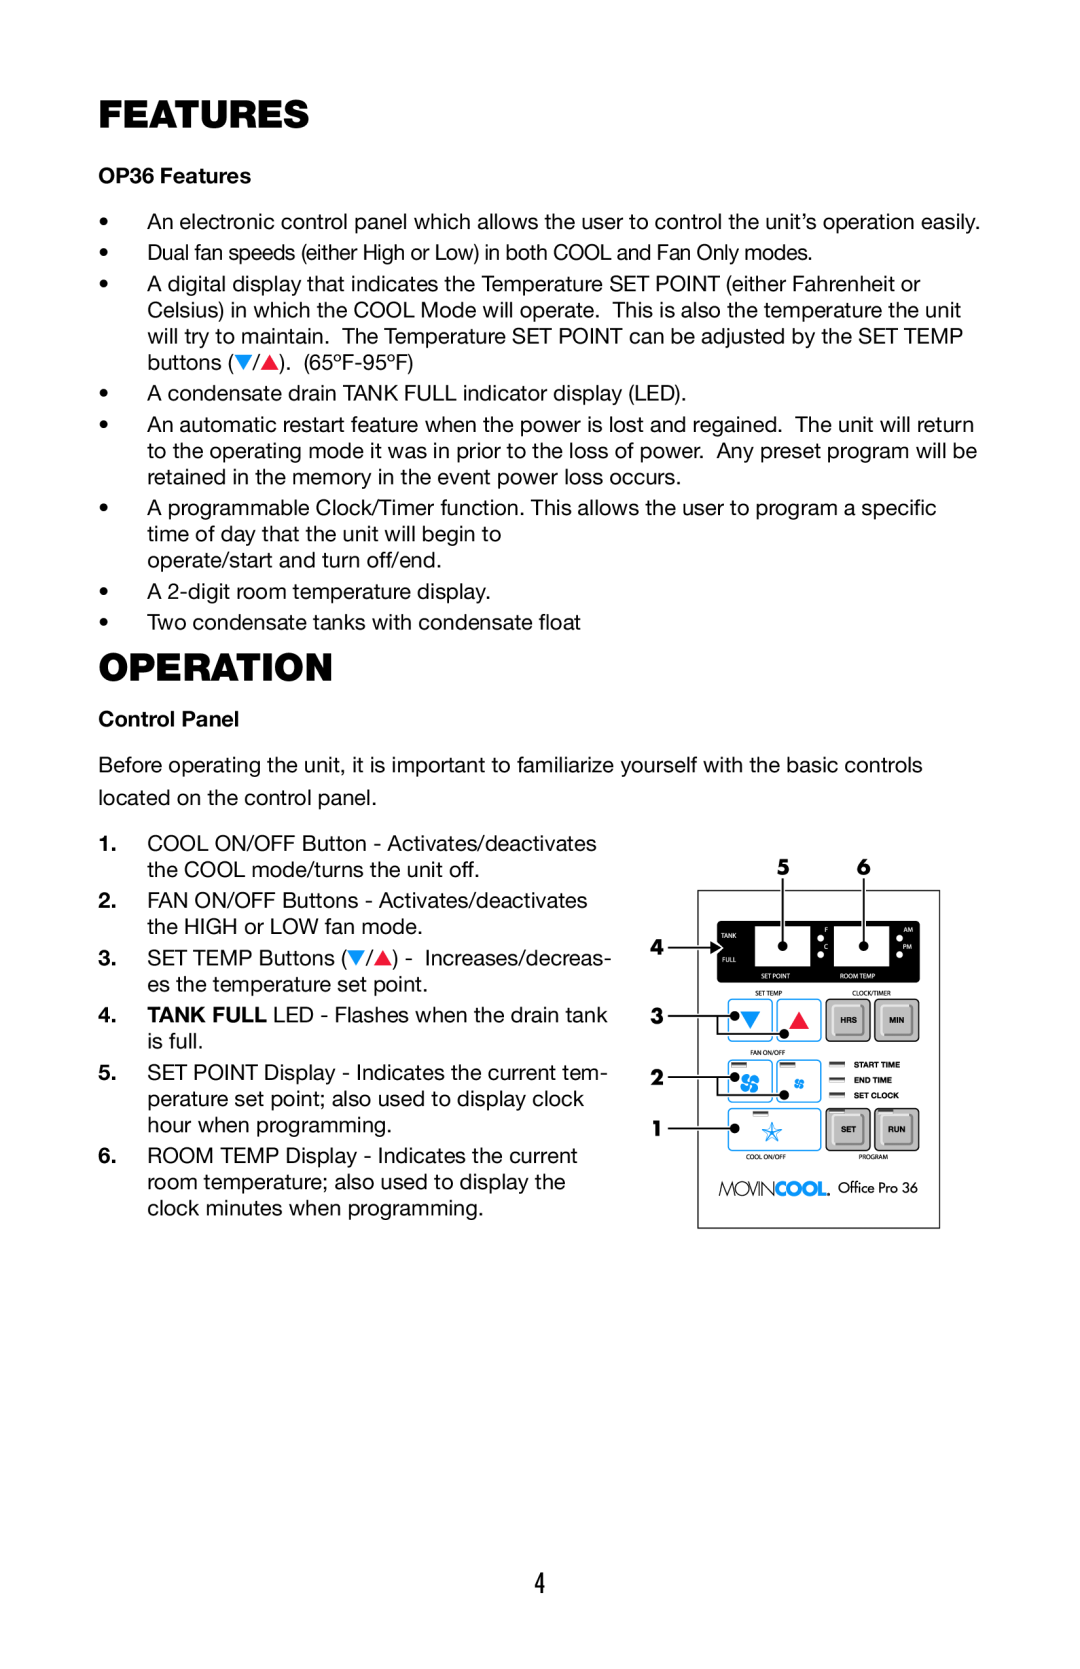 Denso operation manual Operation, OP36 Features, Control Panel 